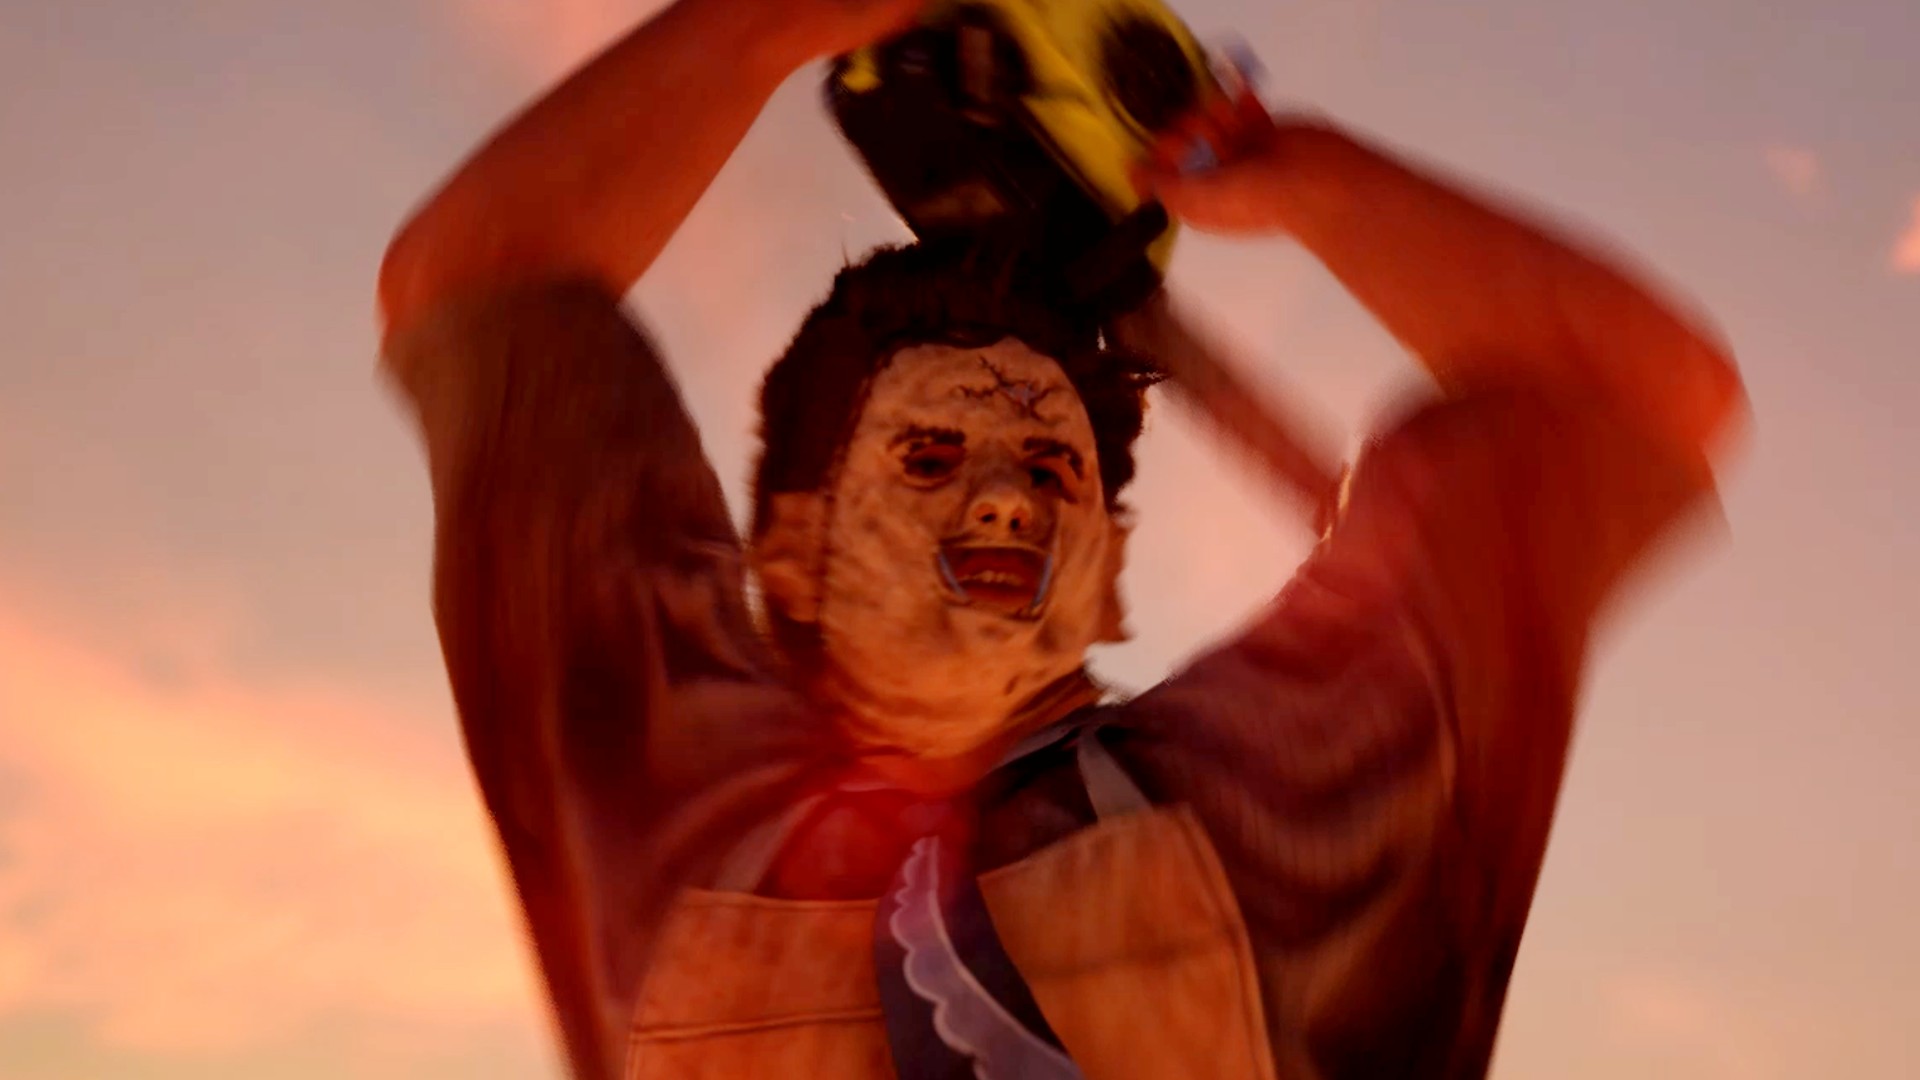 The Texas Chainsaw Massacre release date, trailers, story, and more